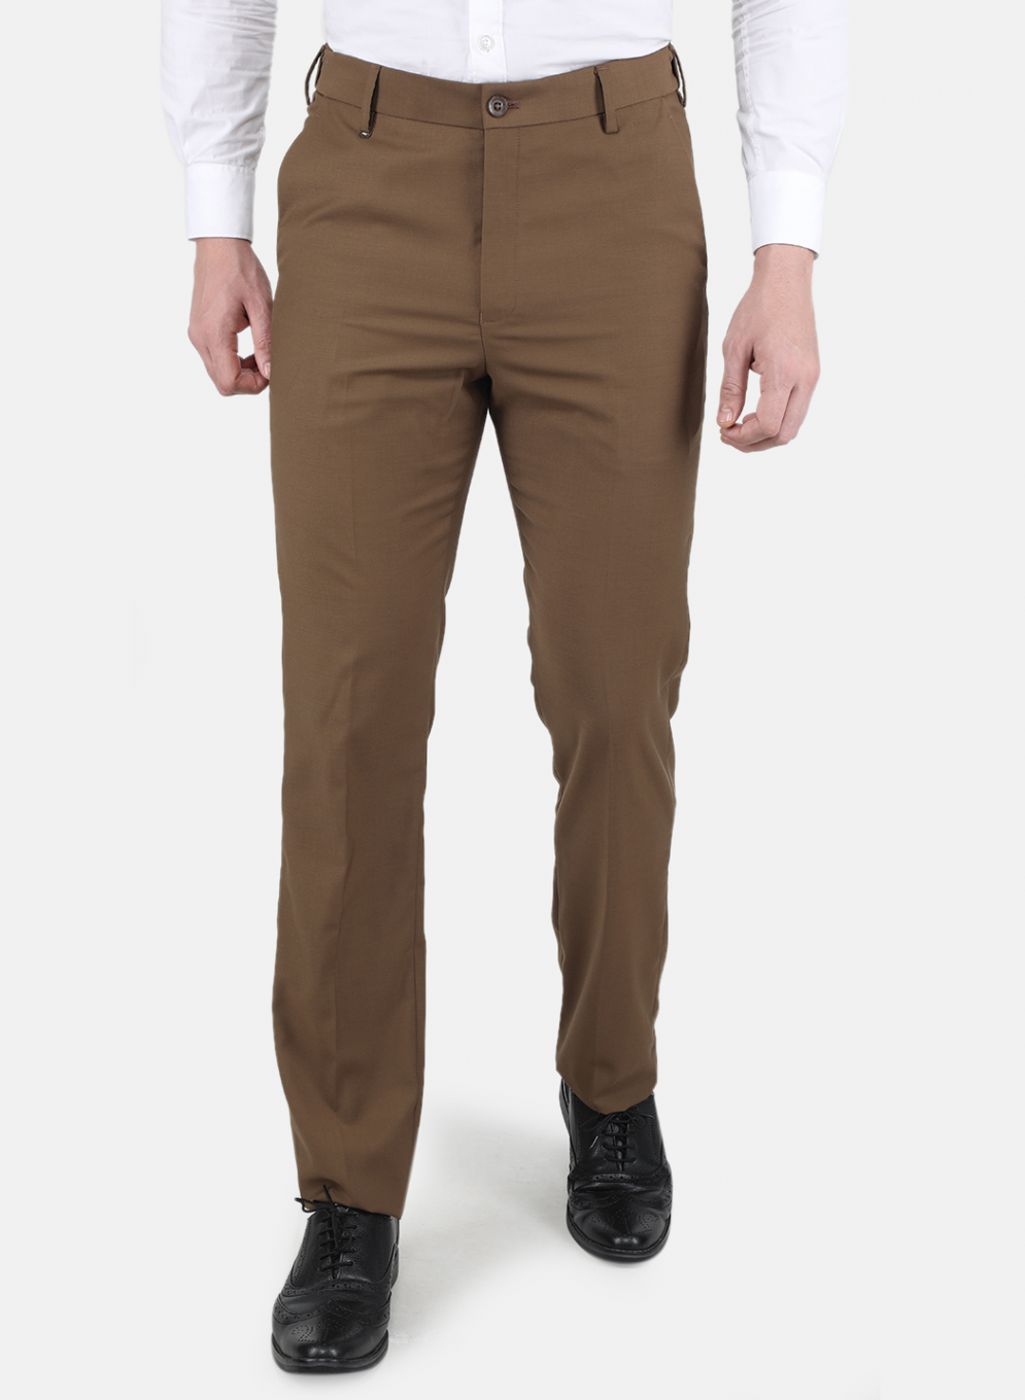 Slim Fit Mens Trousers - Buy Slim Fit Mens Trousers Online at Best Prices  in India